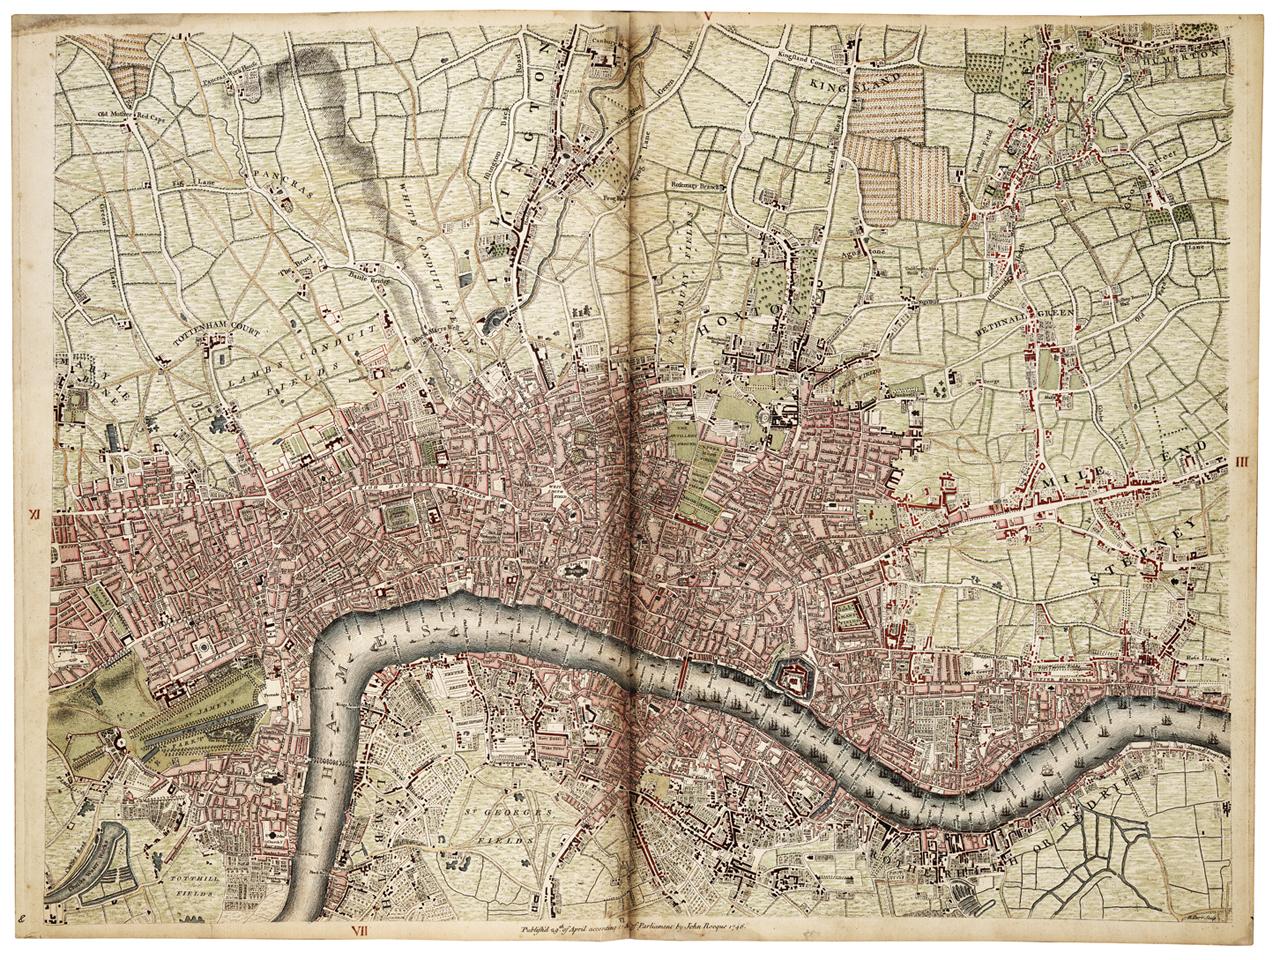 A historical map of central London by John Rocque